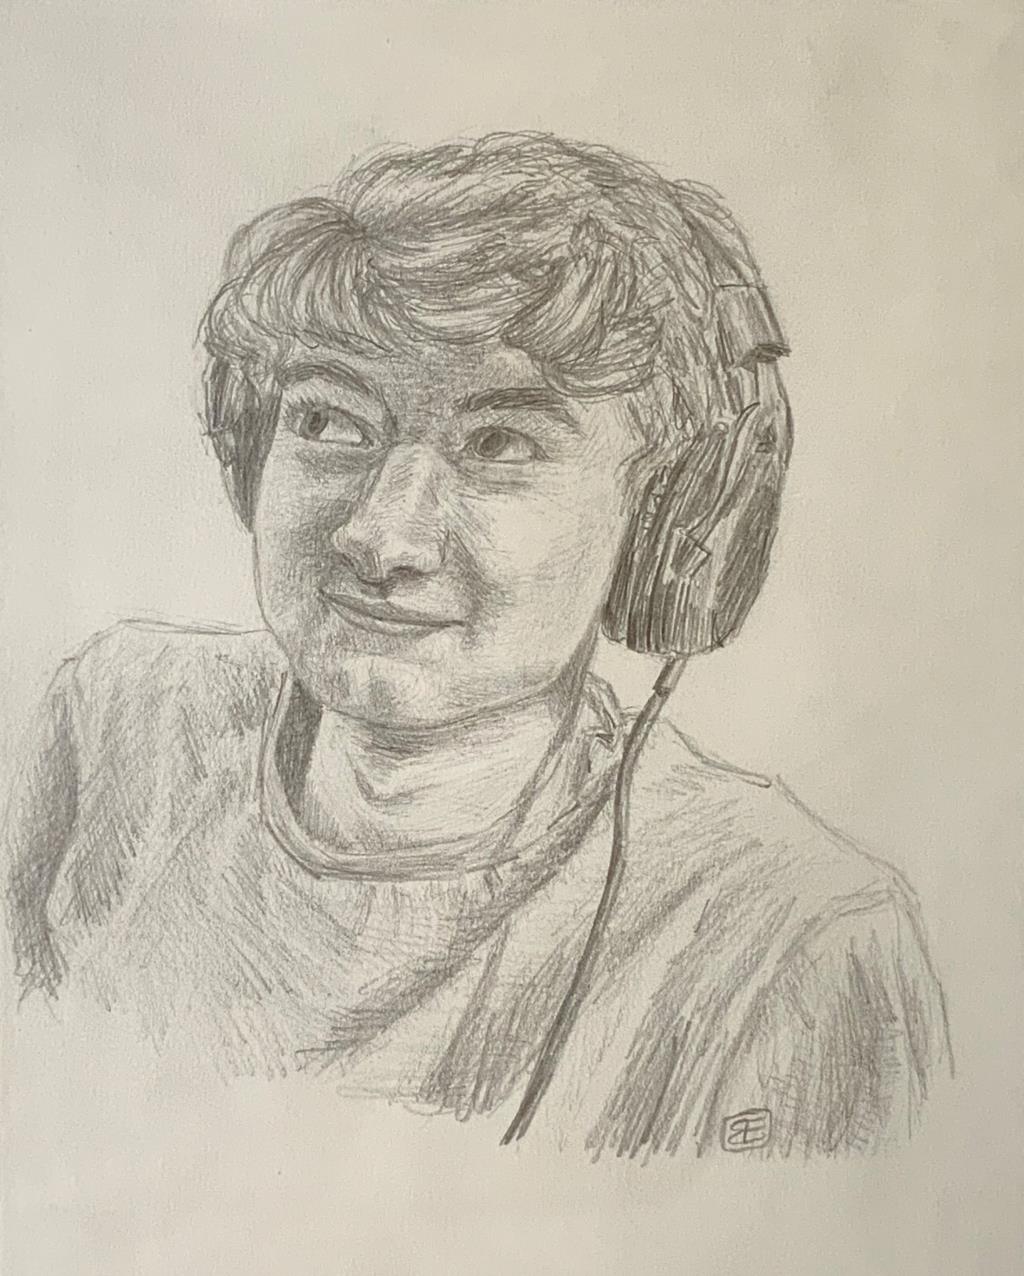 (age 15) "Eleanor found comfort during the pandemic through art and youtube, expressing herself often through portrait drawings of some of her favorite youtubers. This drawing is of the popular content created by the online name of 